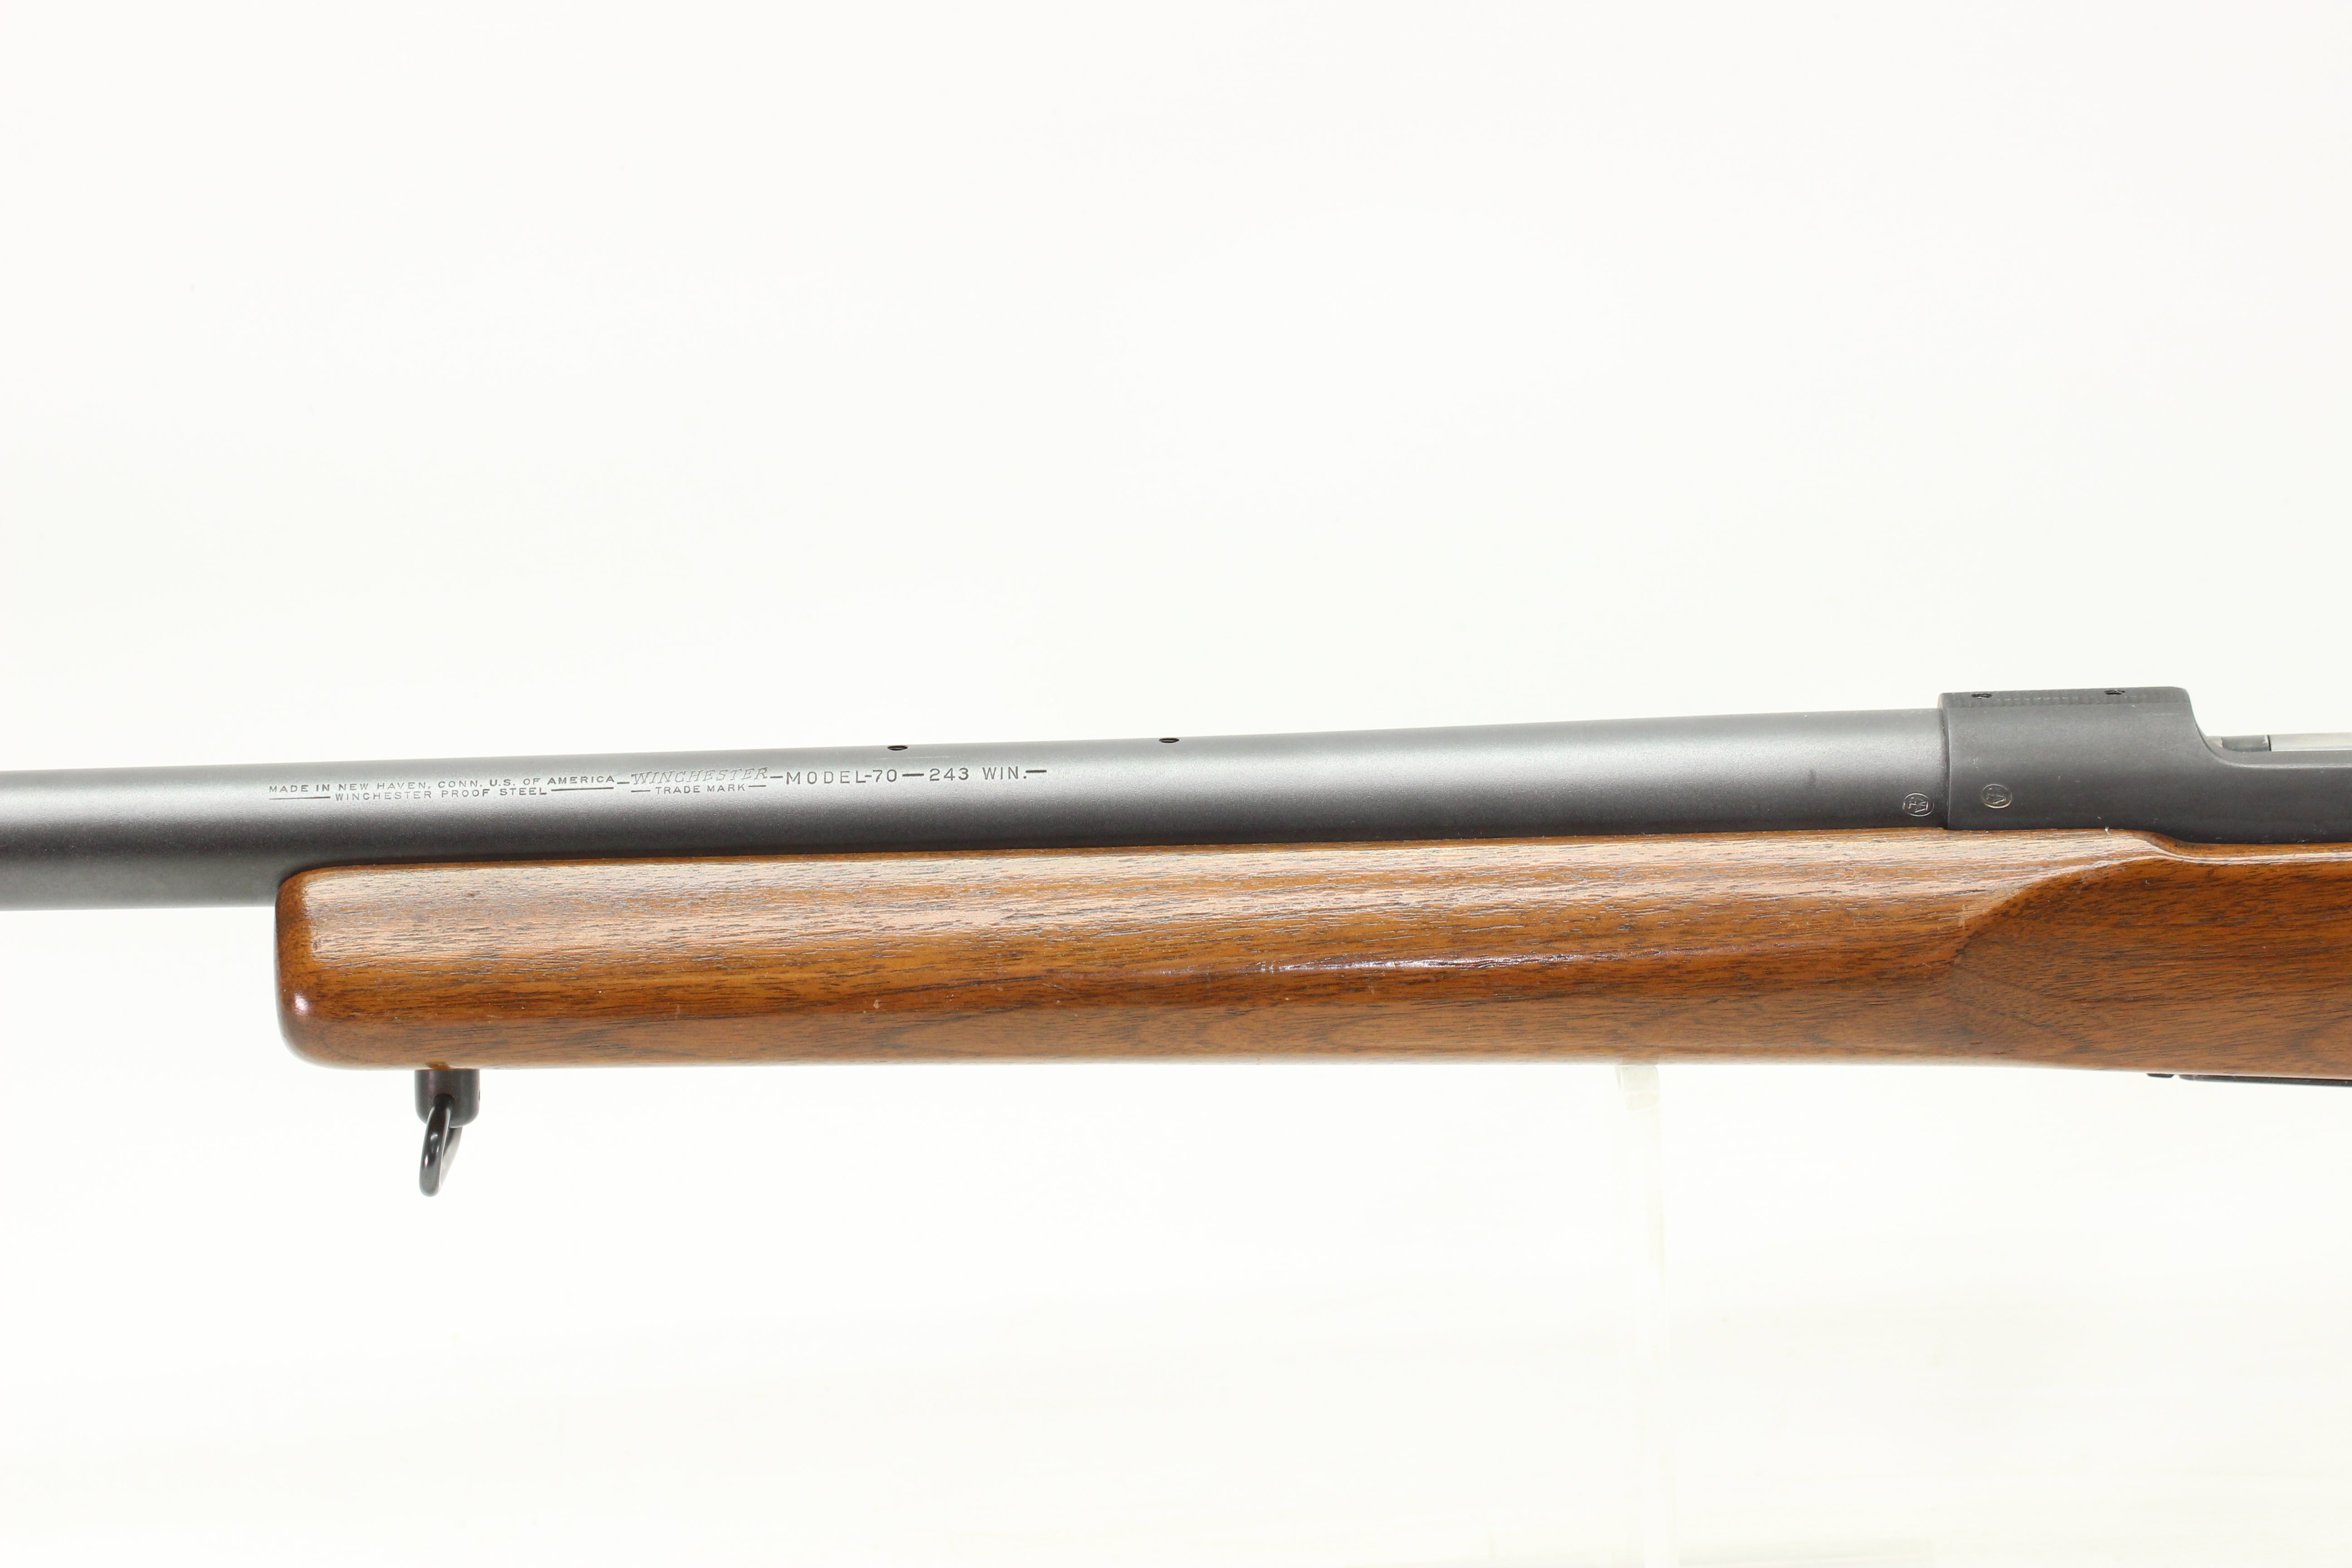 .243 Winchester Target Rifle - 1956